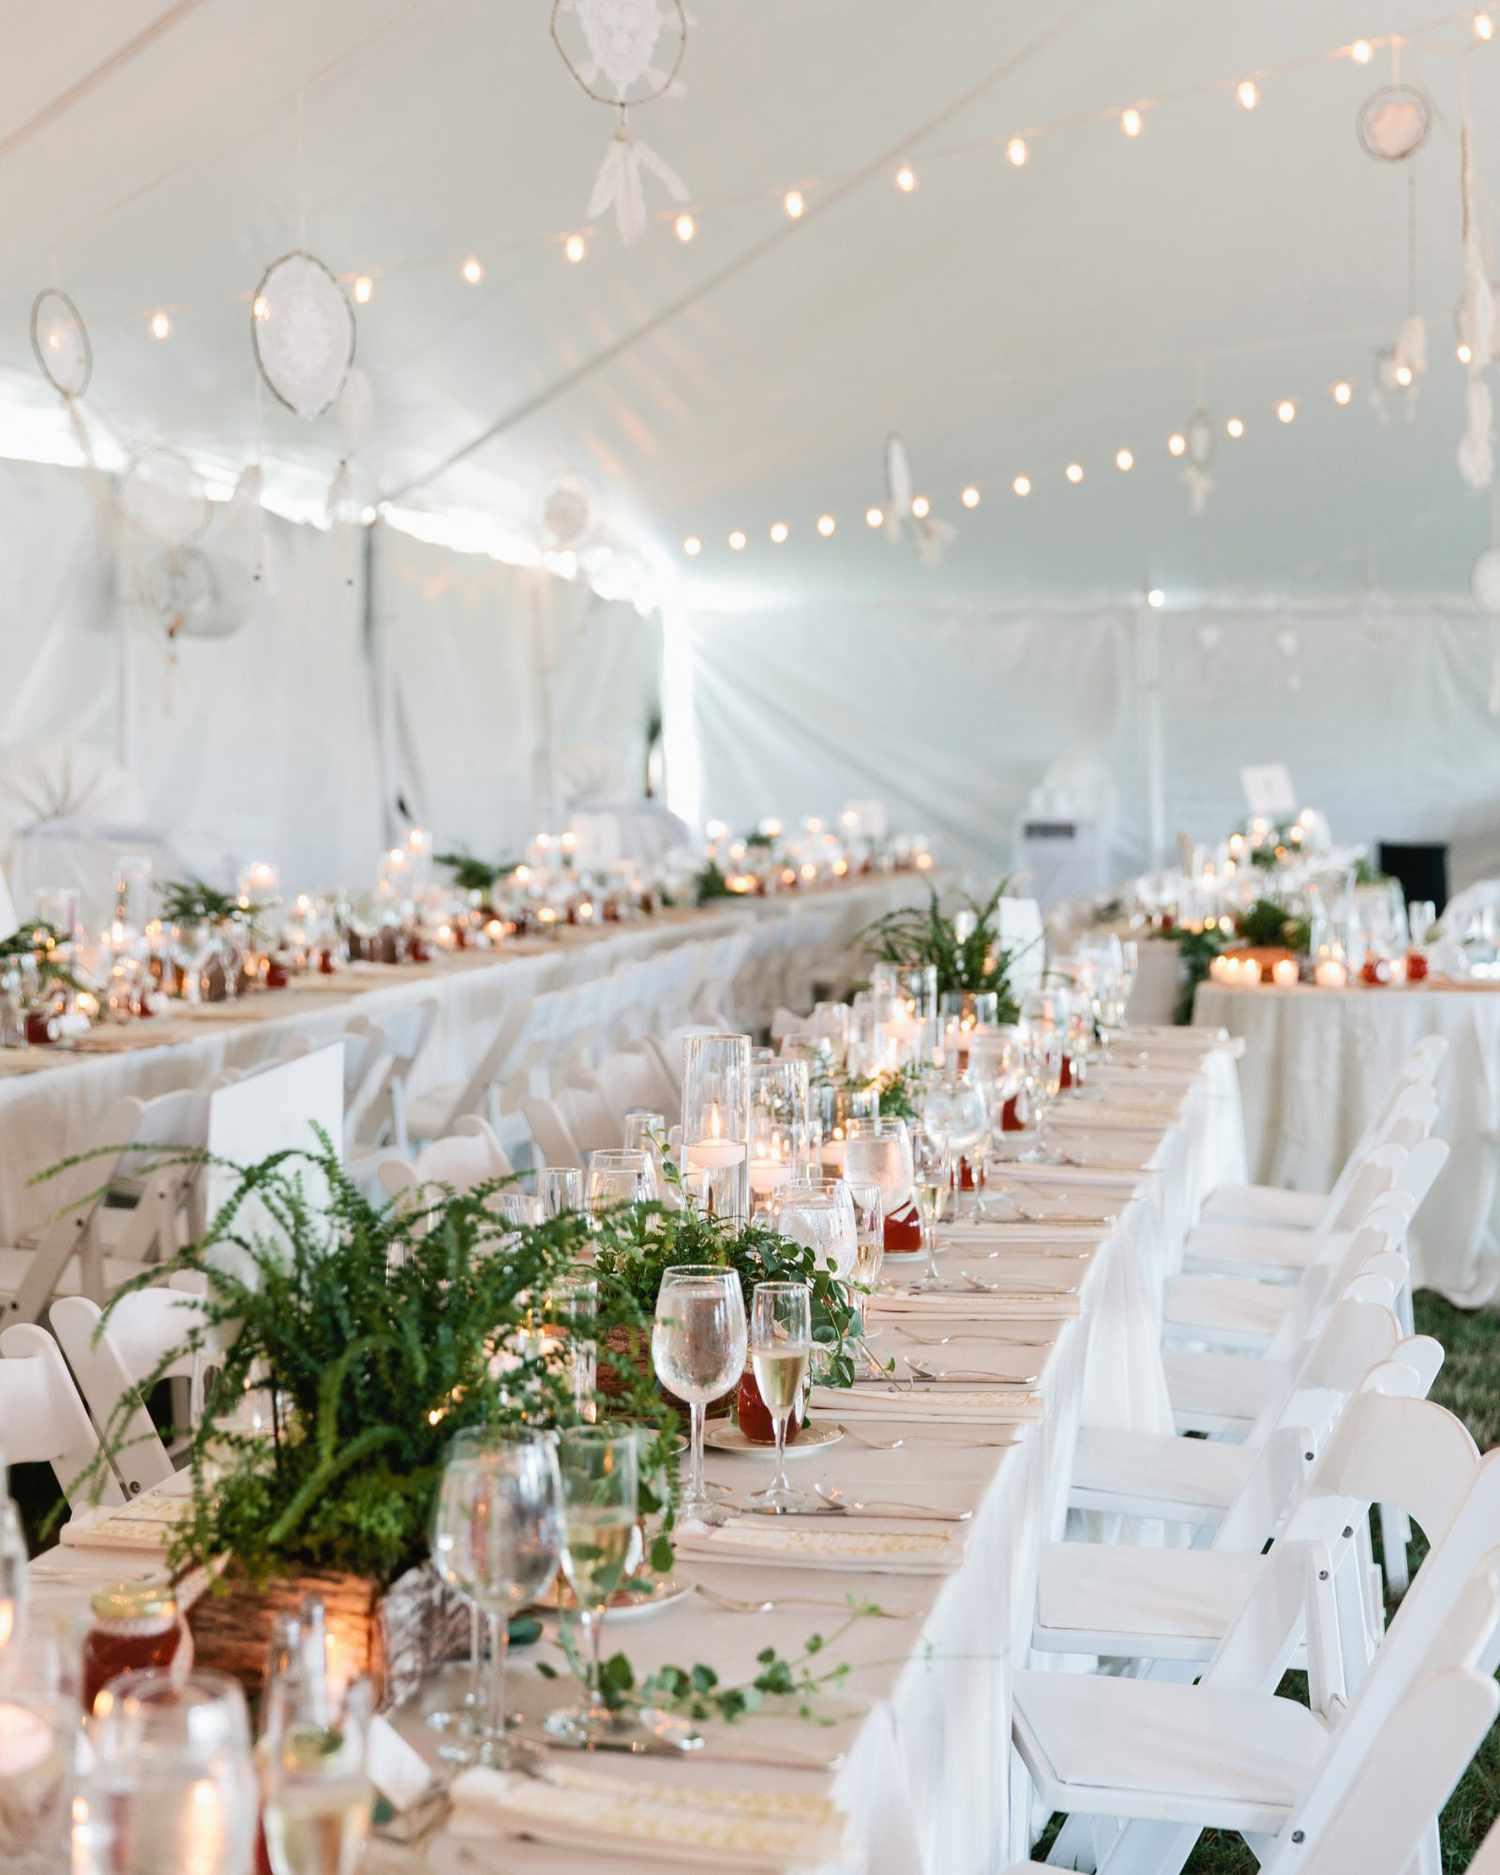 The Tented Reception